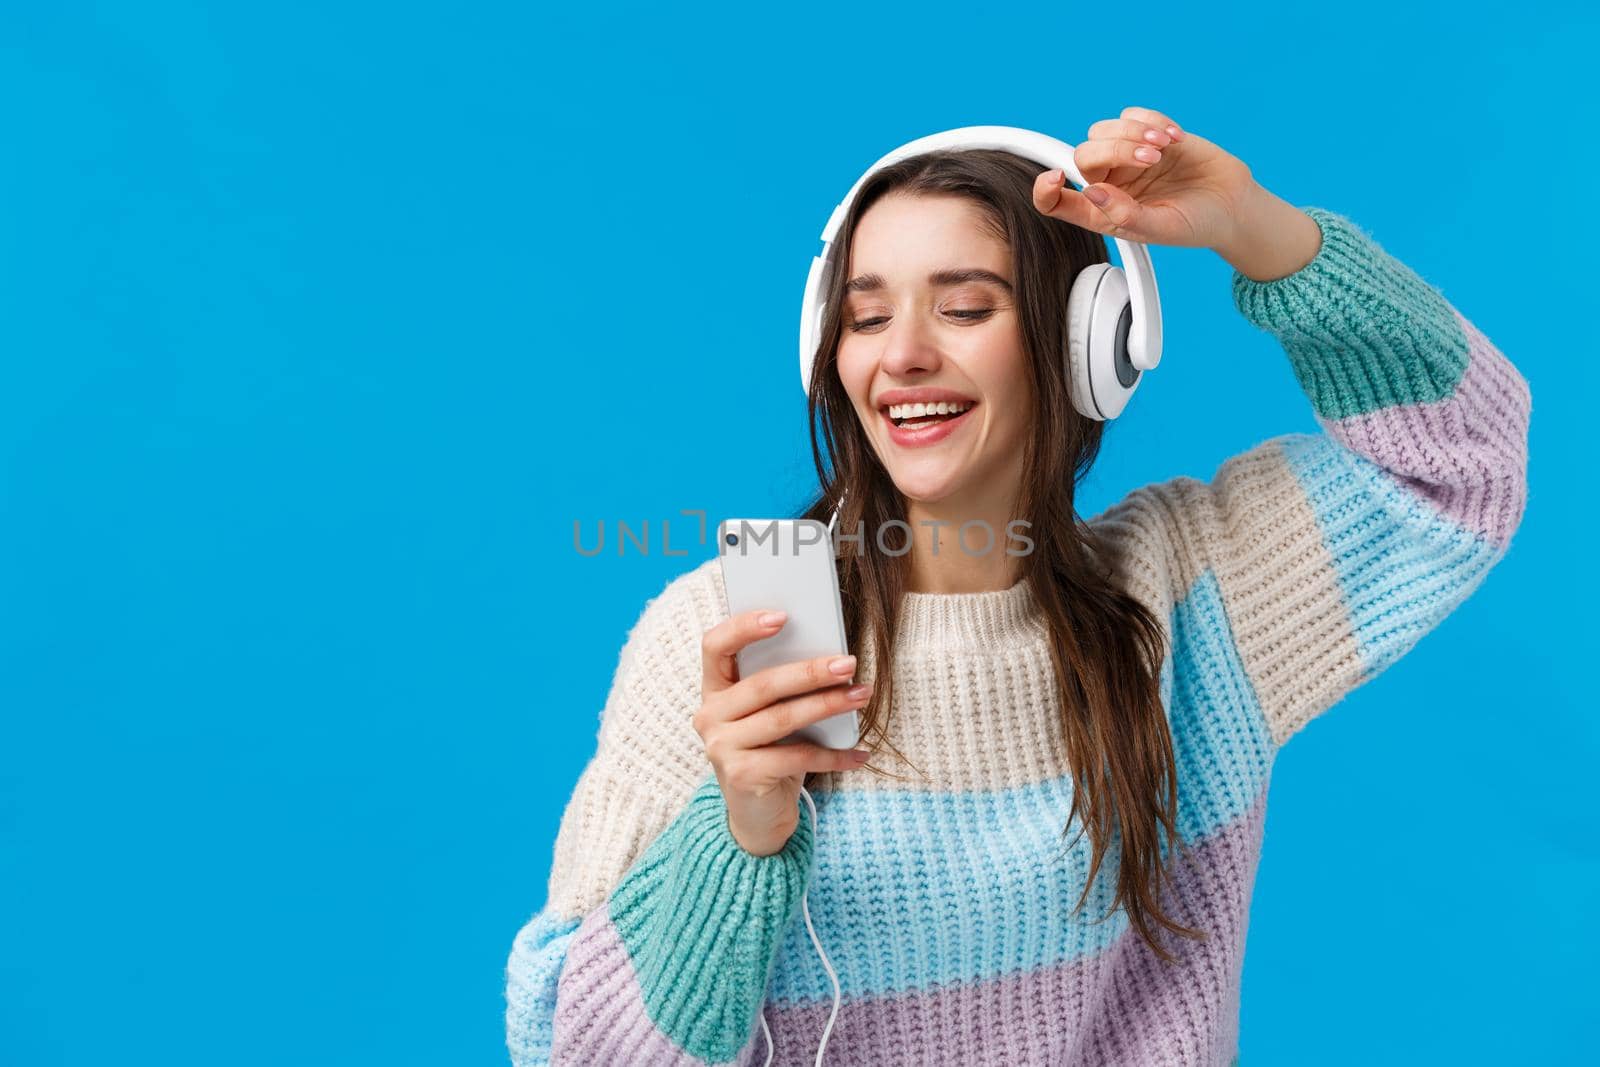 Happy charismatic and carefree smiling european woman enjoying awesome music quality sound in new headphones received as christmas gift, raising hands up holding smartphone, blue background.